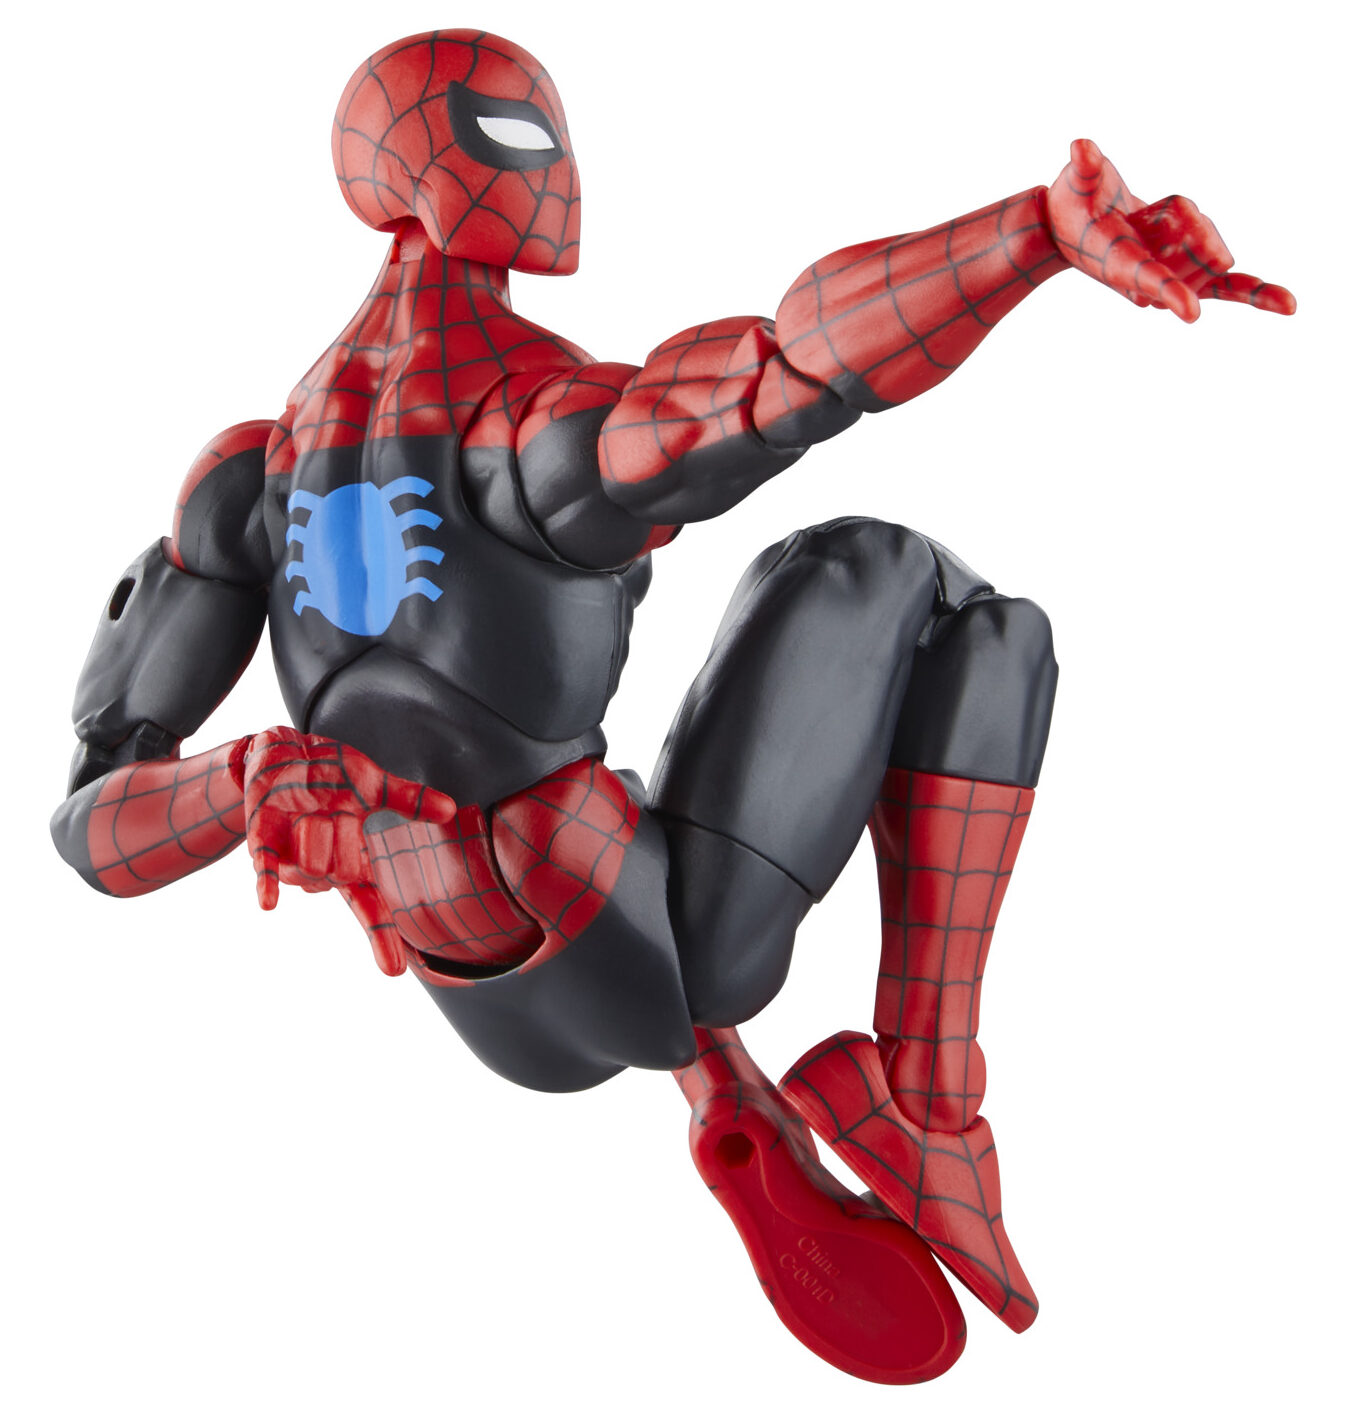 EXCLUSIVE: Marvel Legends Goes Retro With Extreme Articulation Spider-Man  and Moon Knight